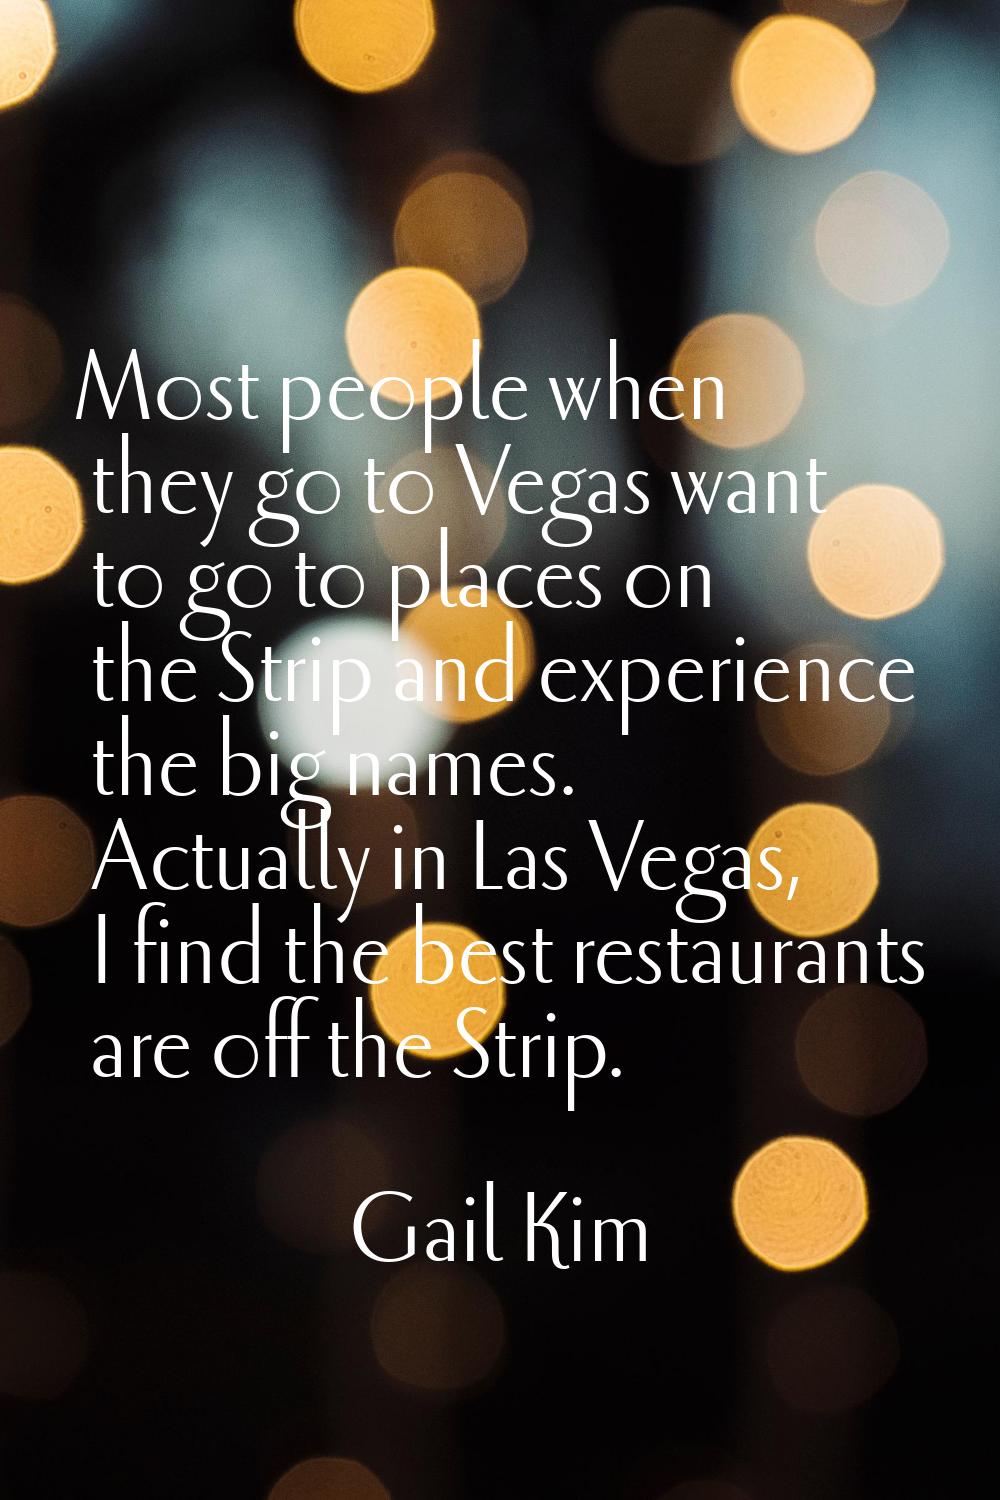 Most people when they go to Vegas want to go to places on the Strip and experience the big names. A